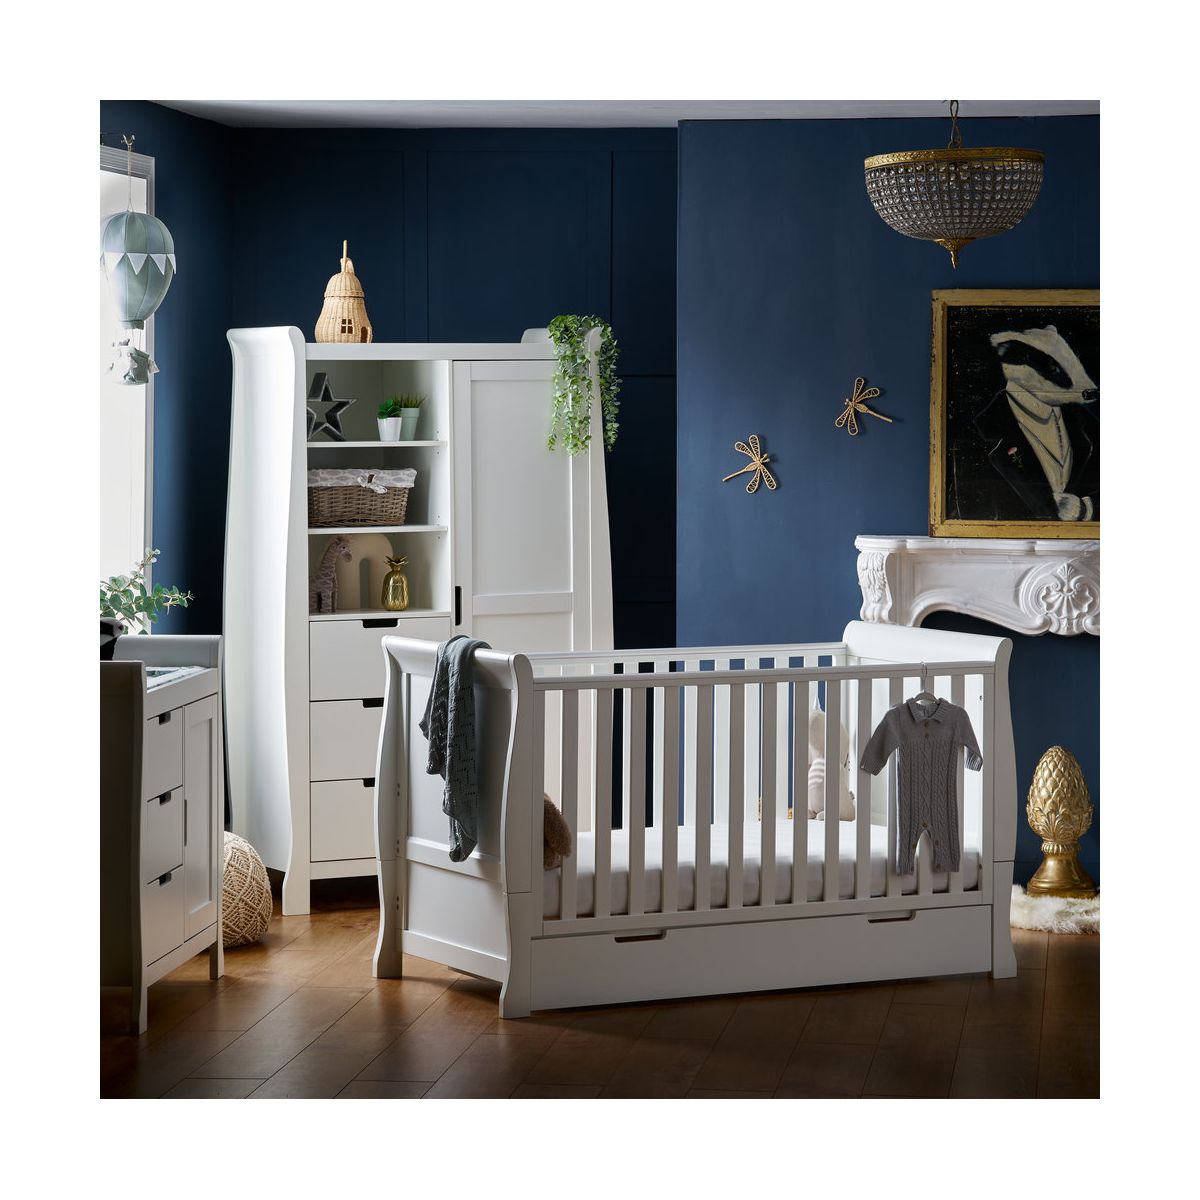 Obaby Stamford Classic Sleigh 3 Piece Furniture Roomset